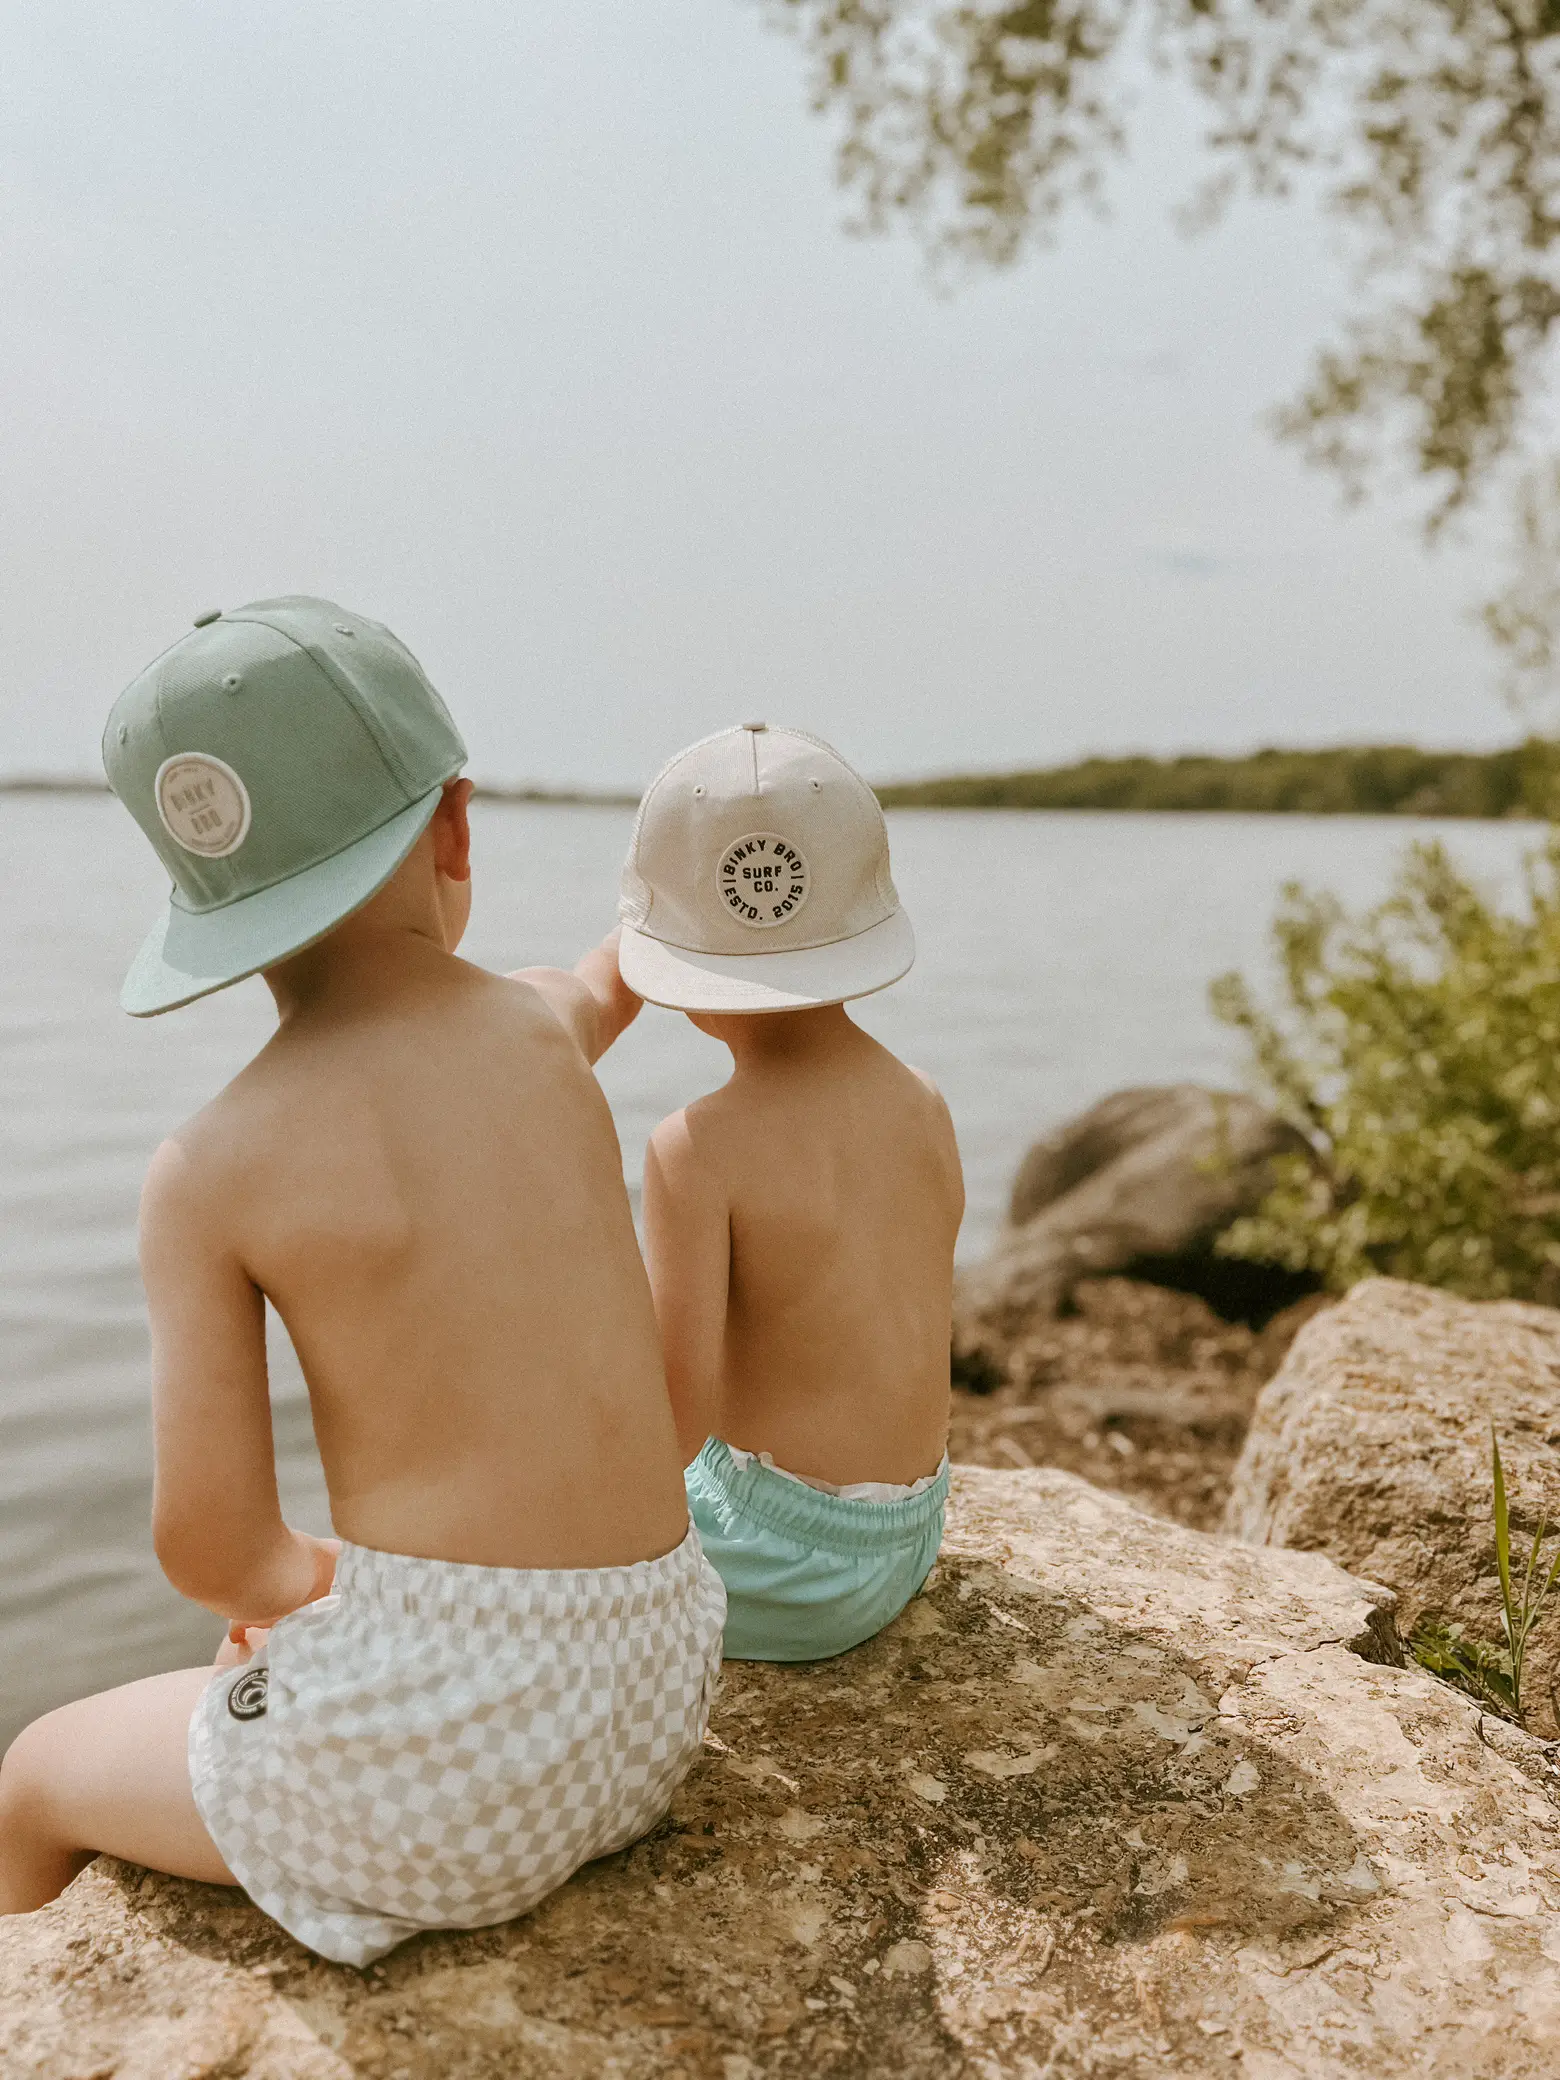 Lake day with two toddlers 🩳, Gallery posted by Kendall Munch